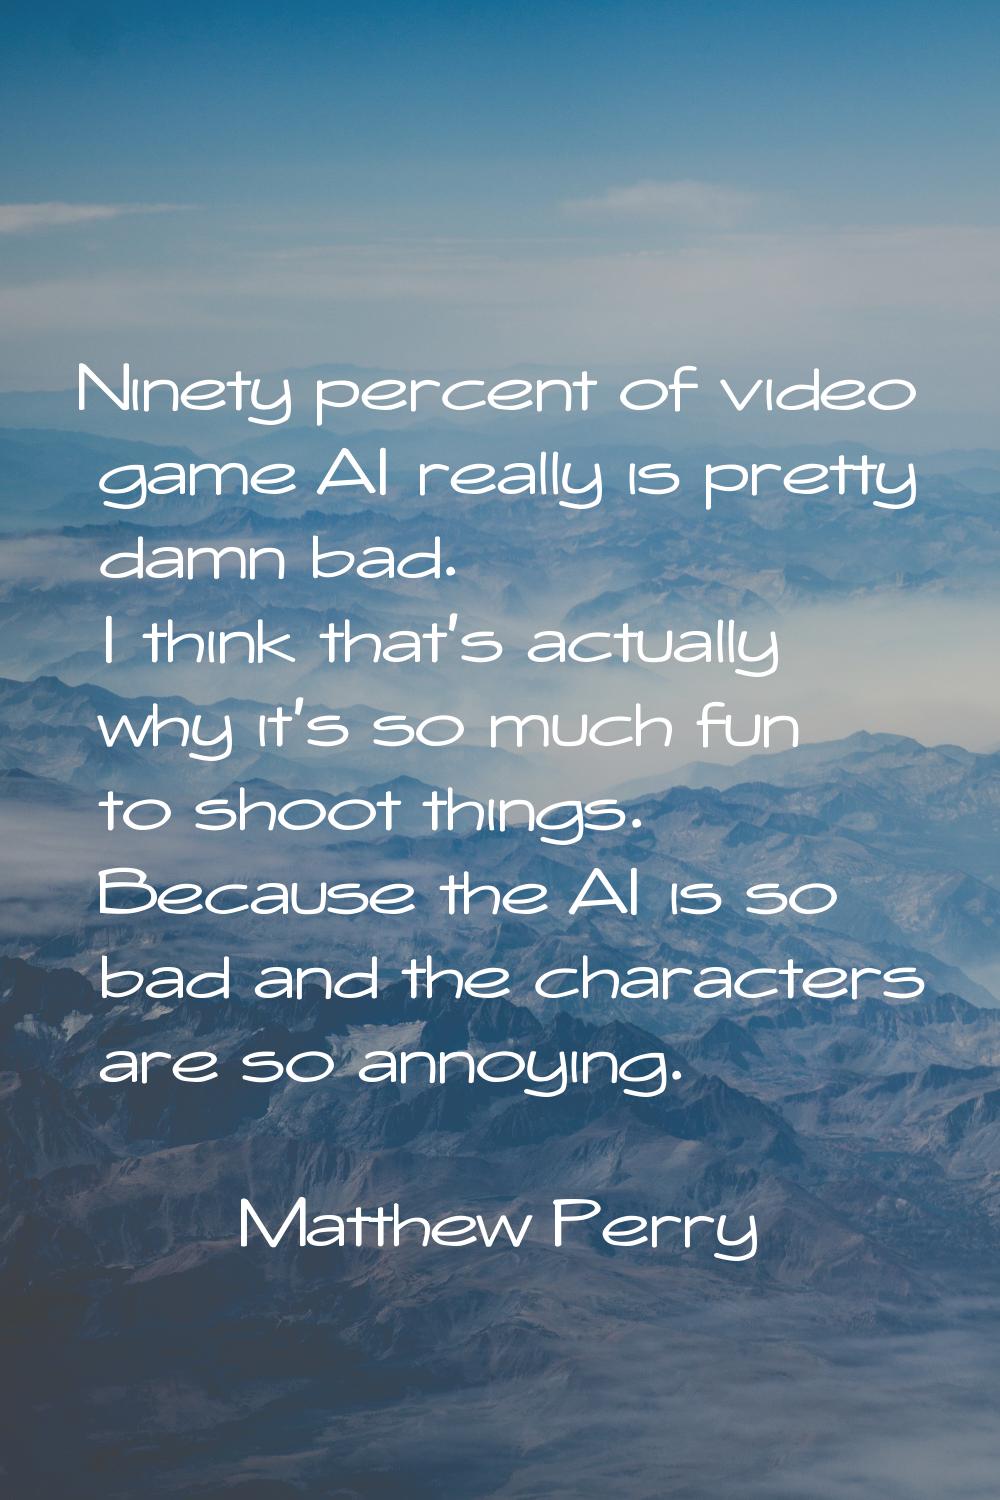 Ninety percent of video game AI really is pretty damn bad. I think that's actually why it's so much